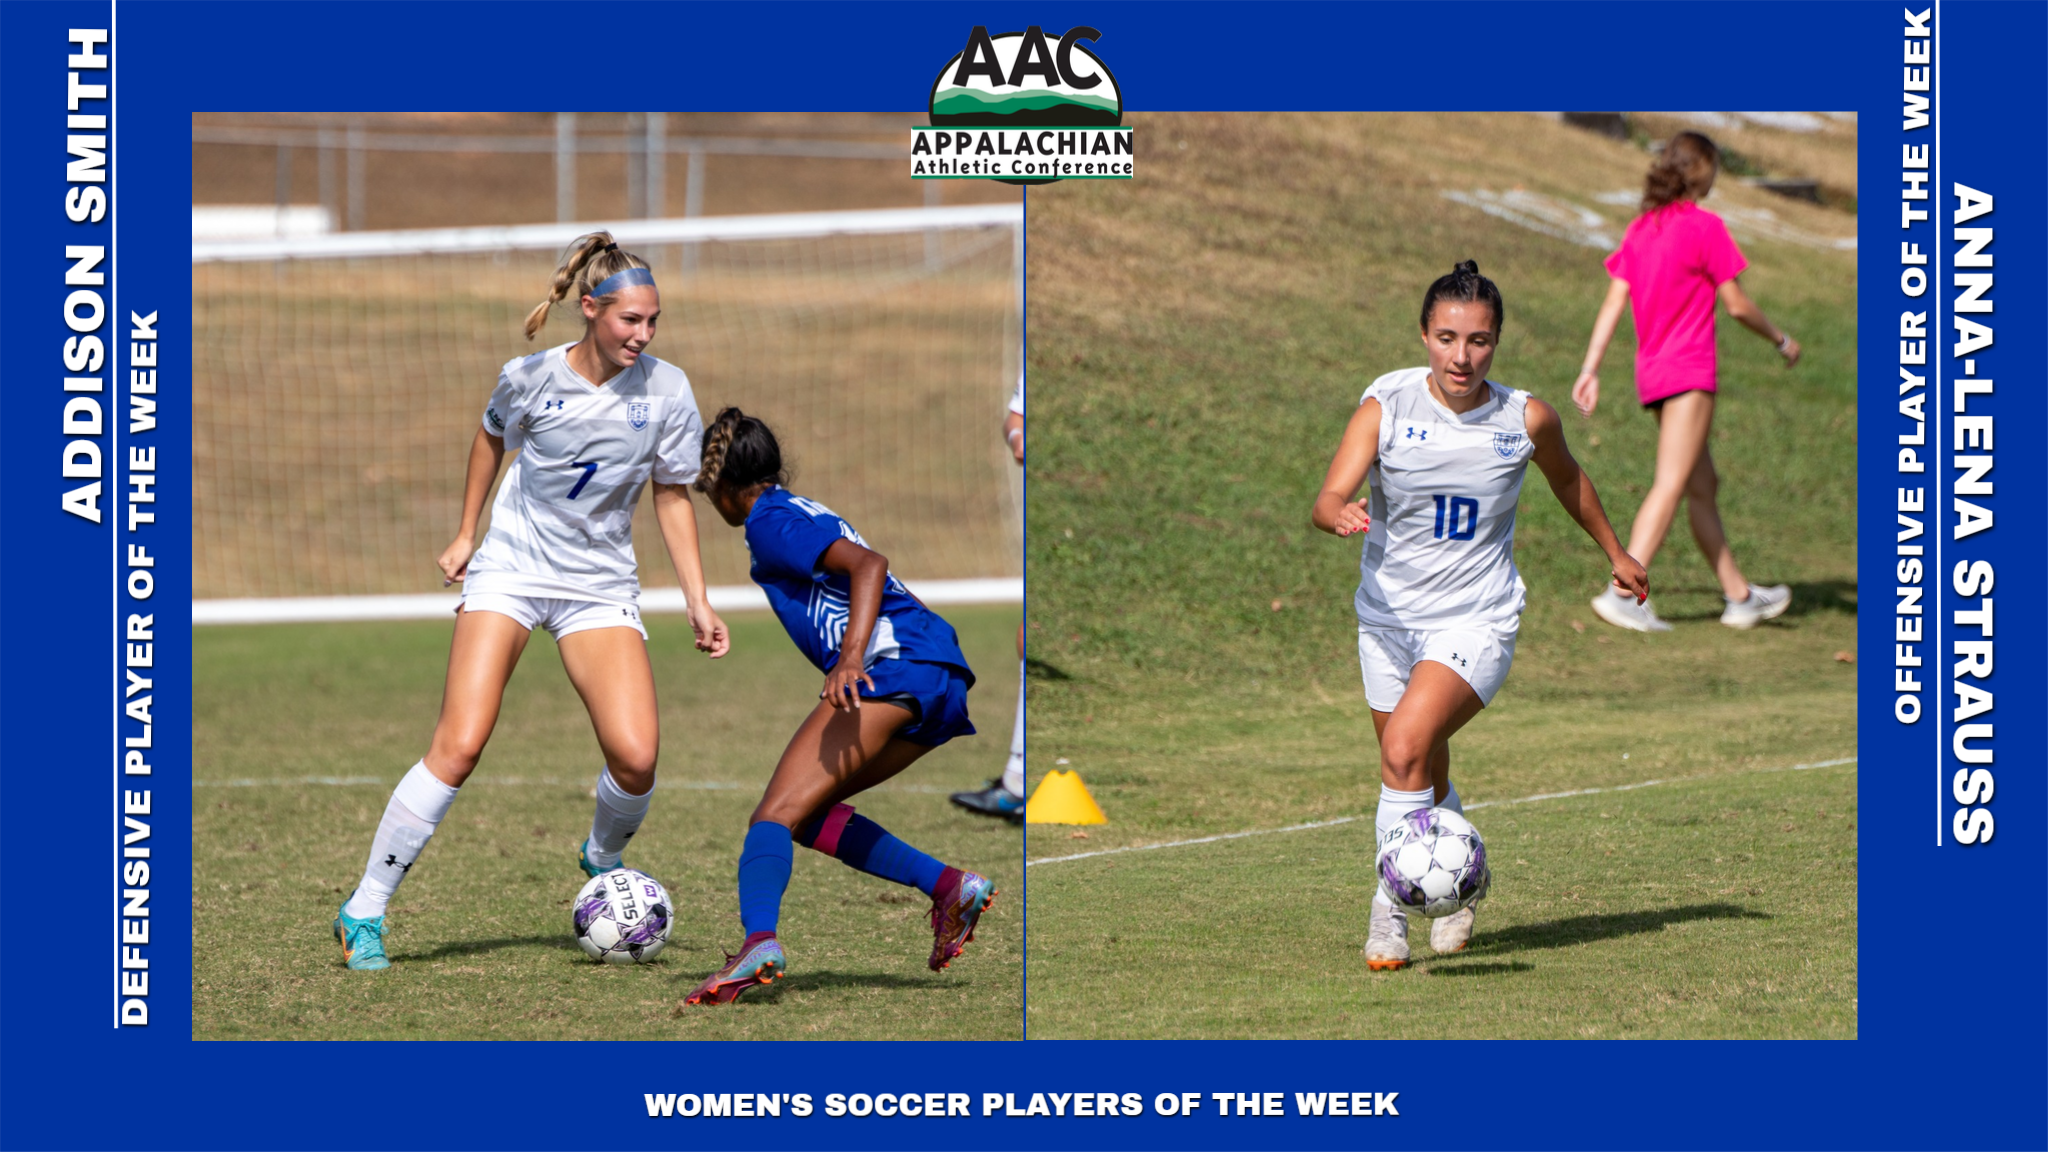 Smith and Strauss Sweep AAC Weekly Awards